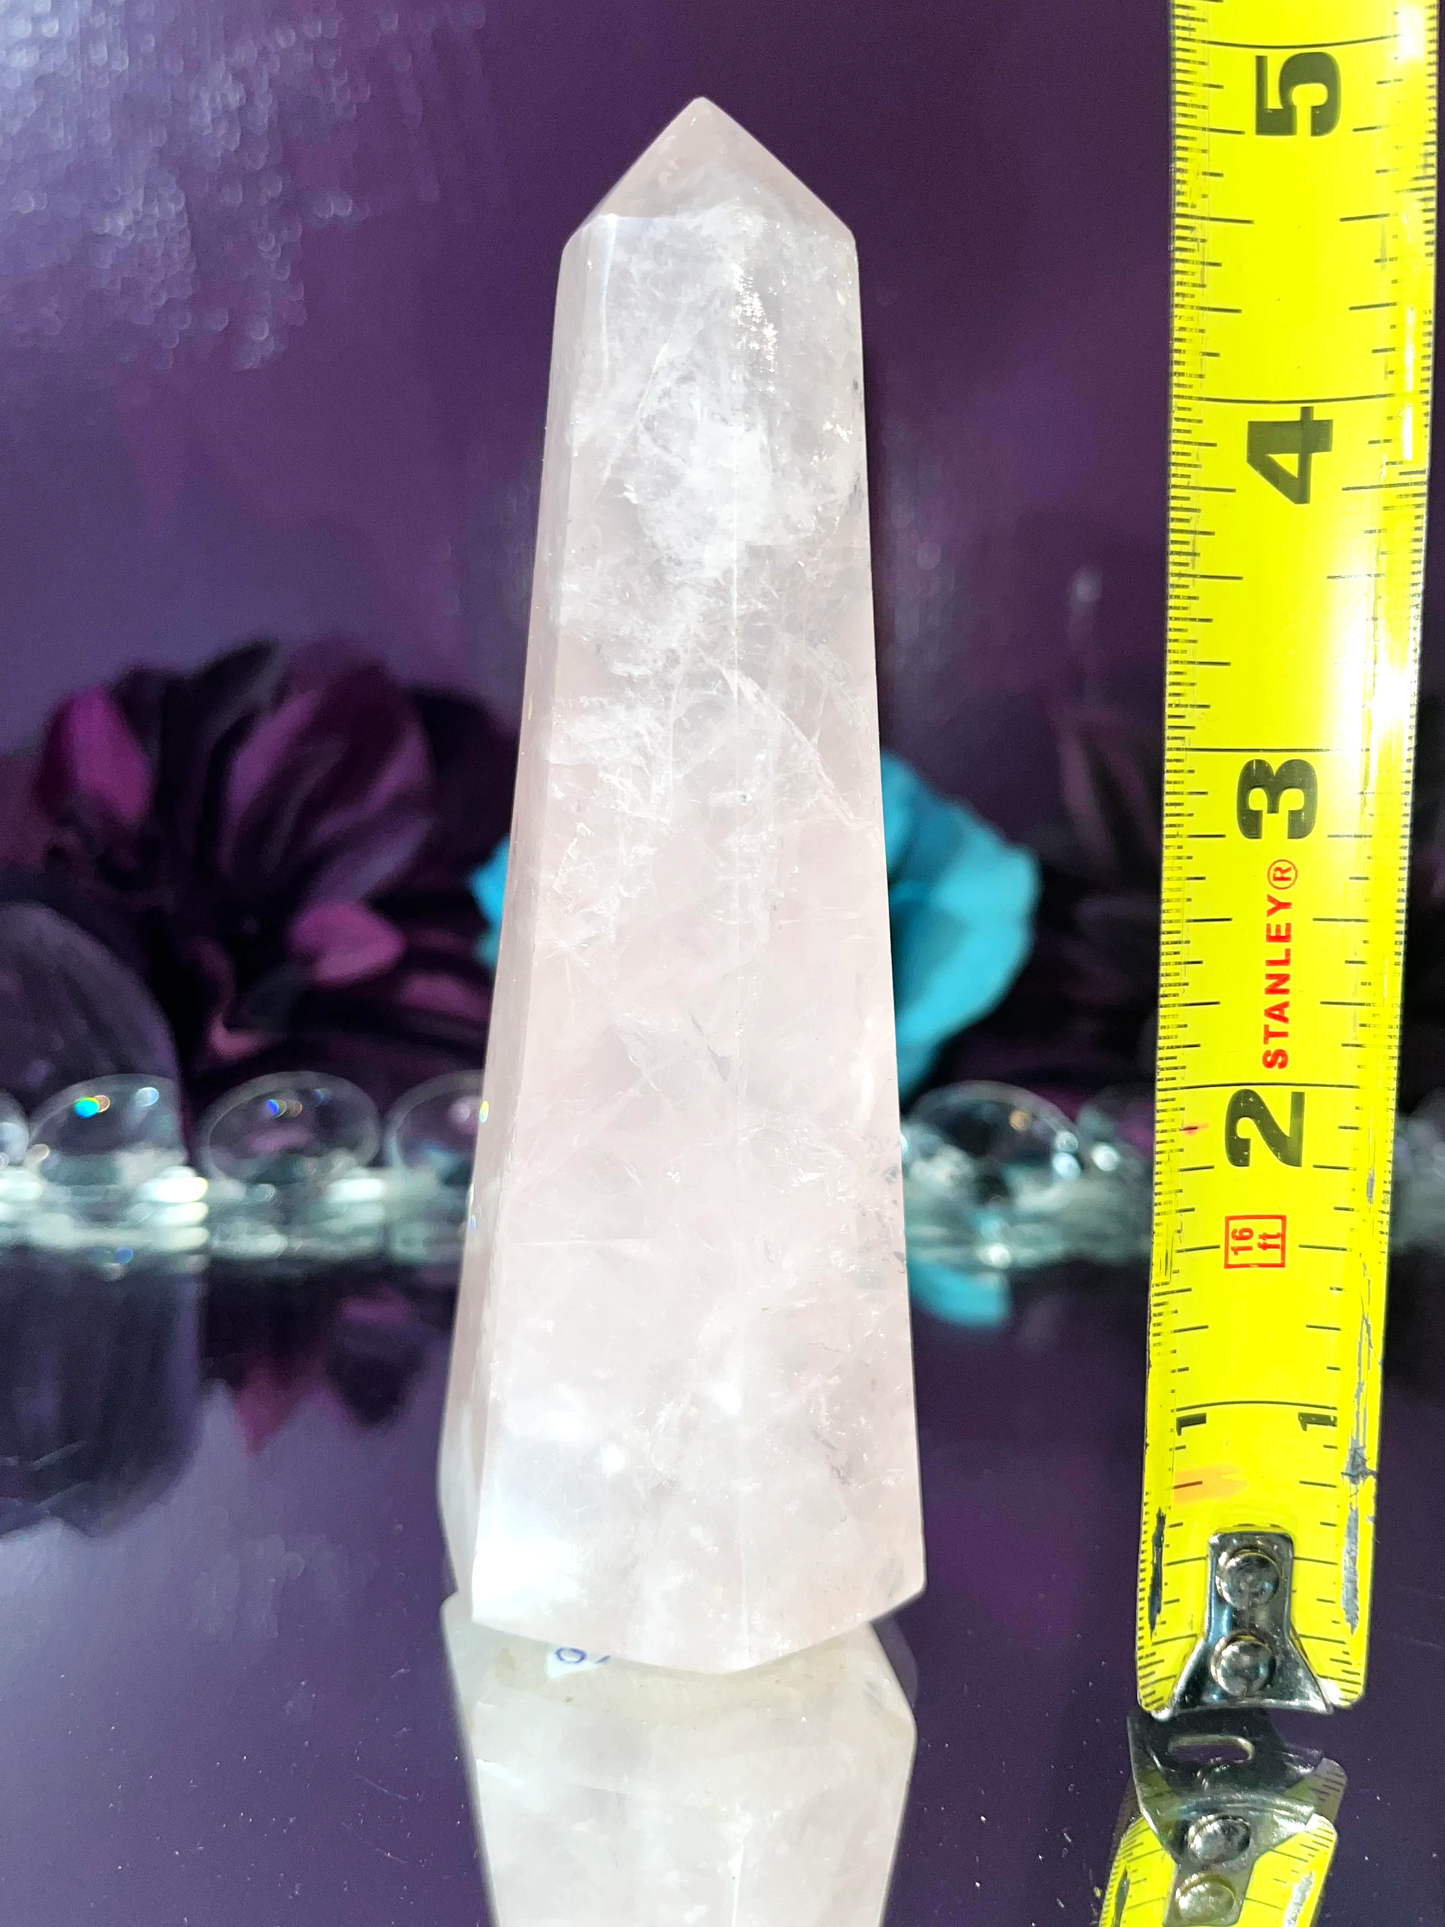 Natural Rose Quartz Obelisk gemmy crystal tower point. Attract and strengthen love of all kinds—romantic, self-love, familial, and platonic